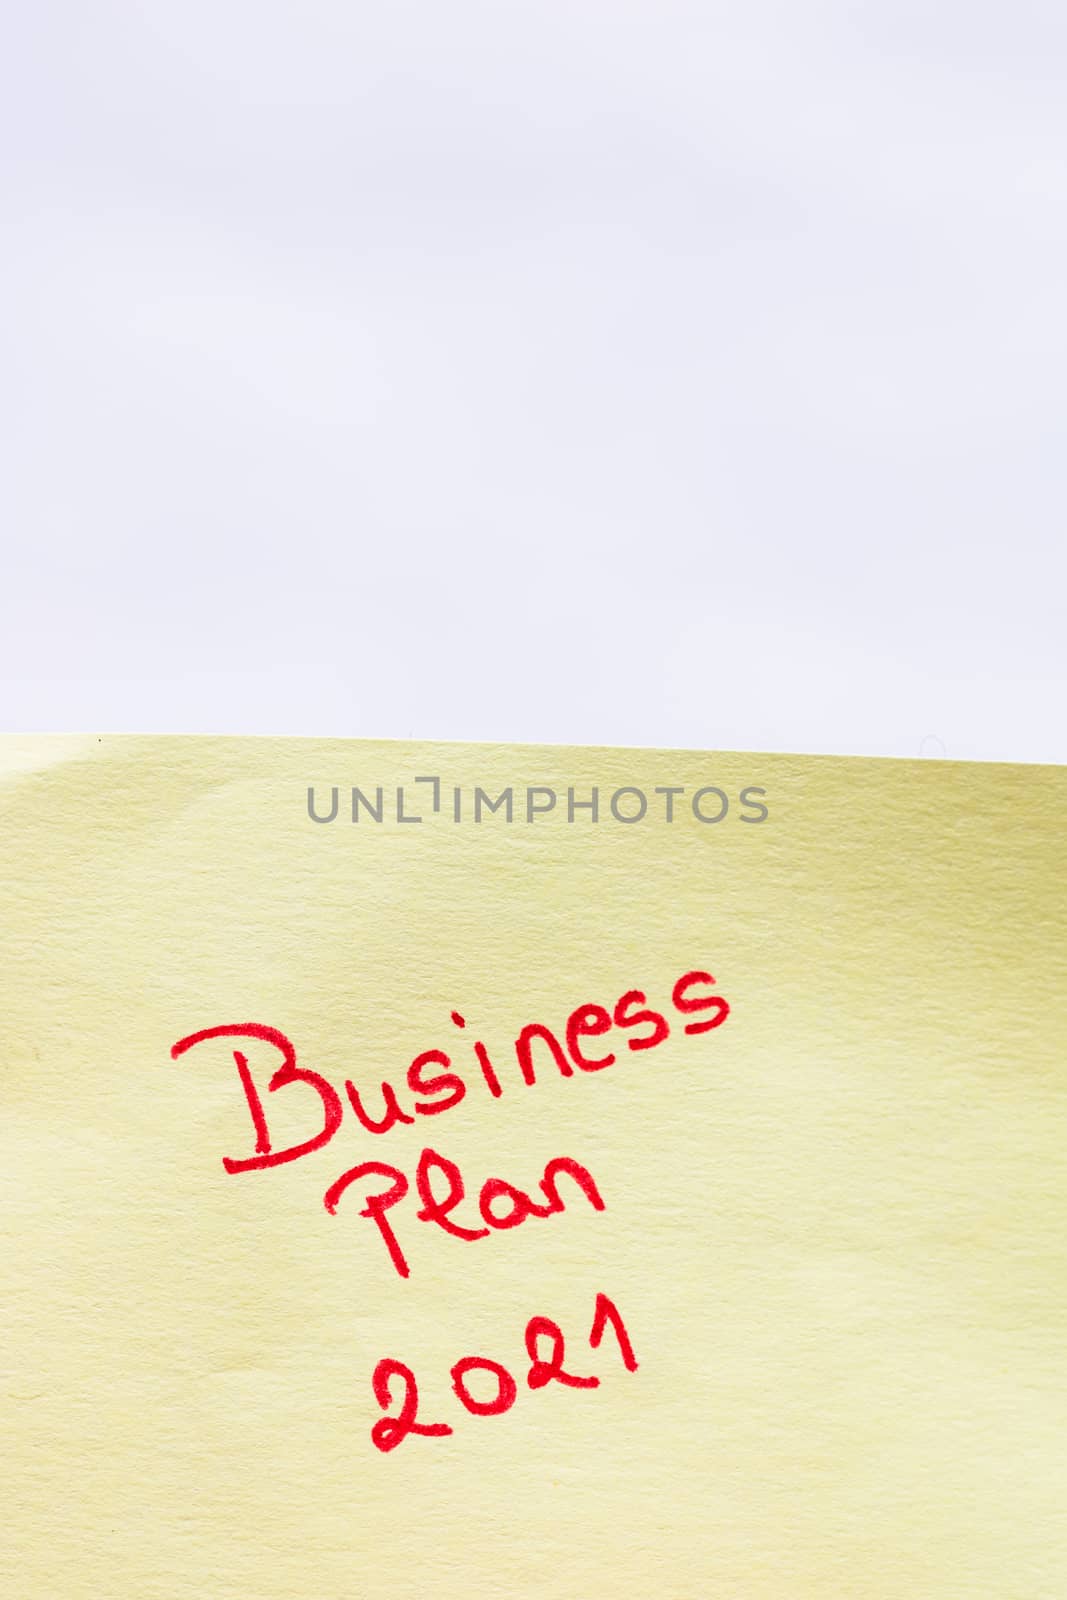 Business plan 2021 handwriting text close up isolated on yellow paper with copy space.